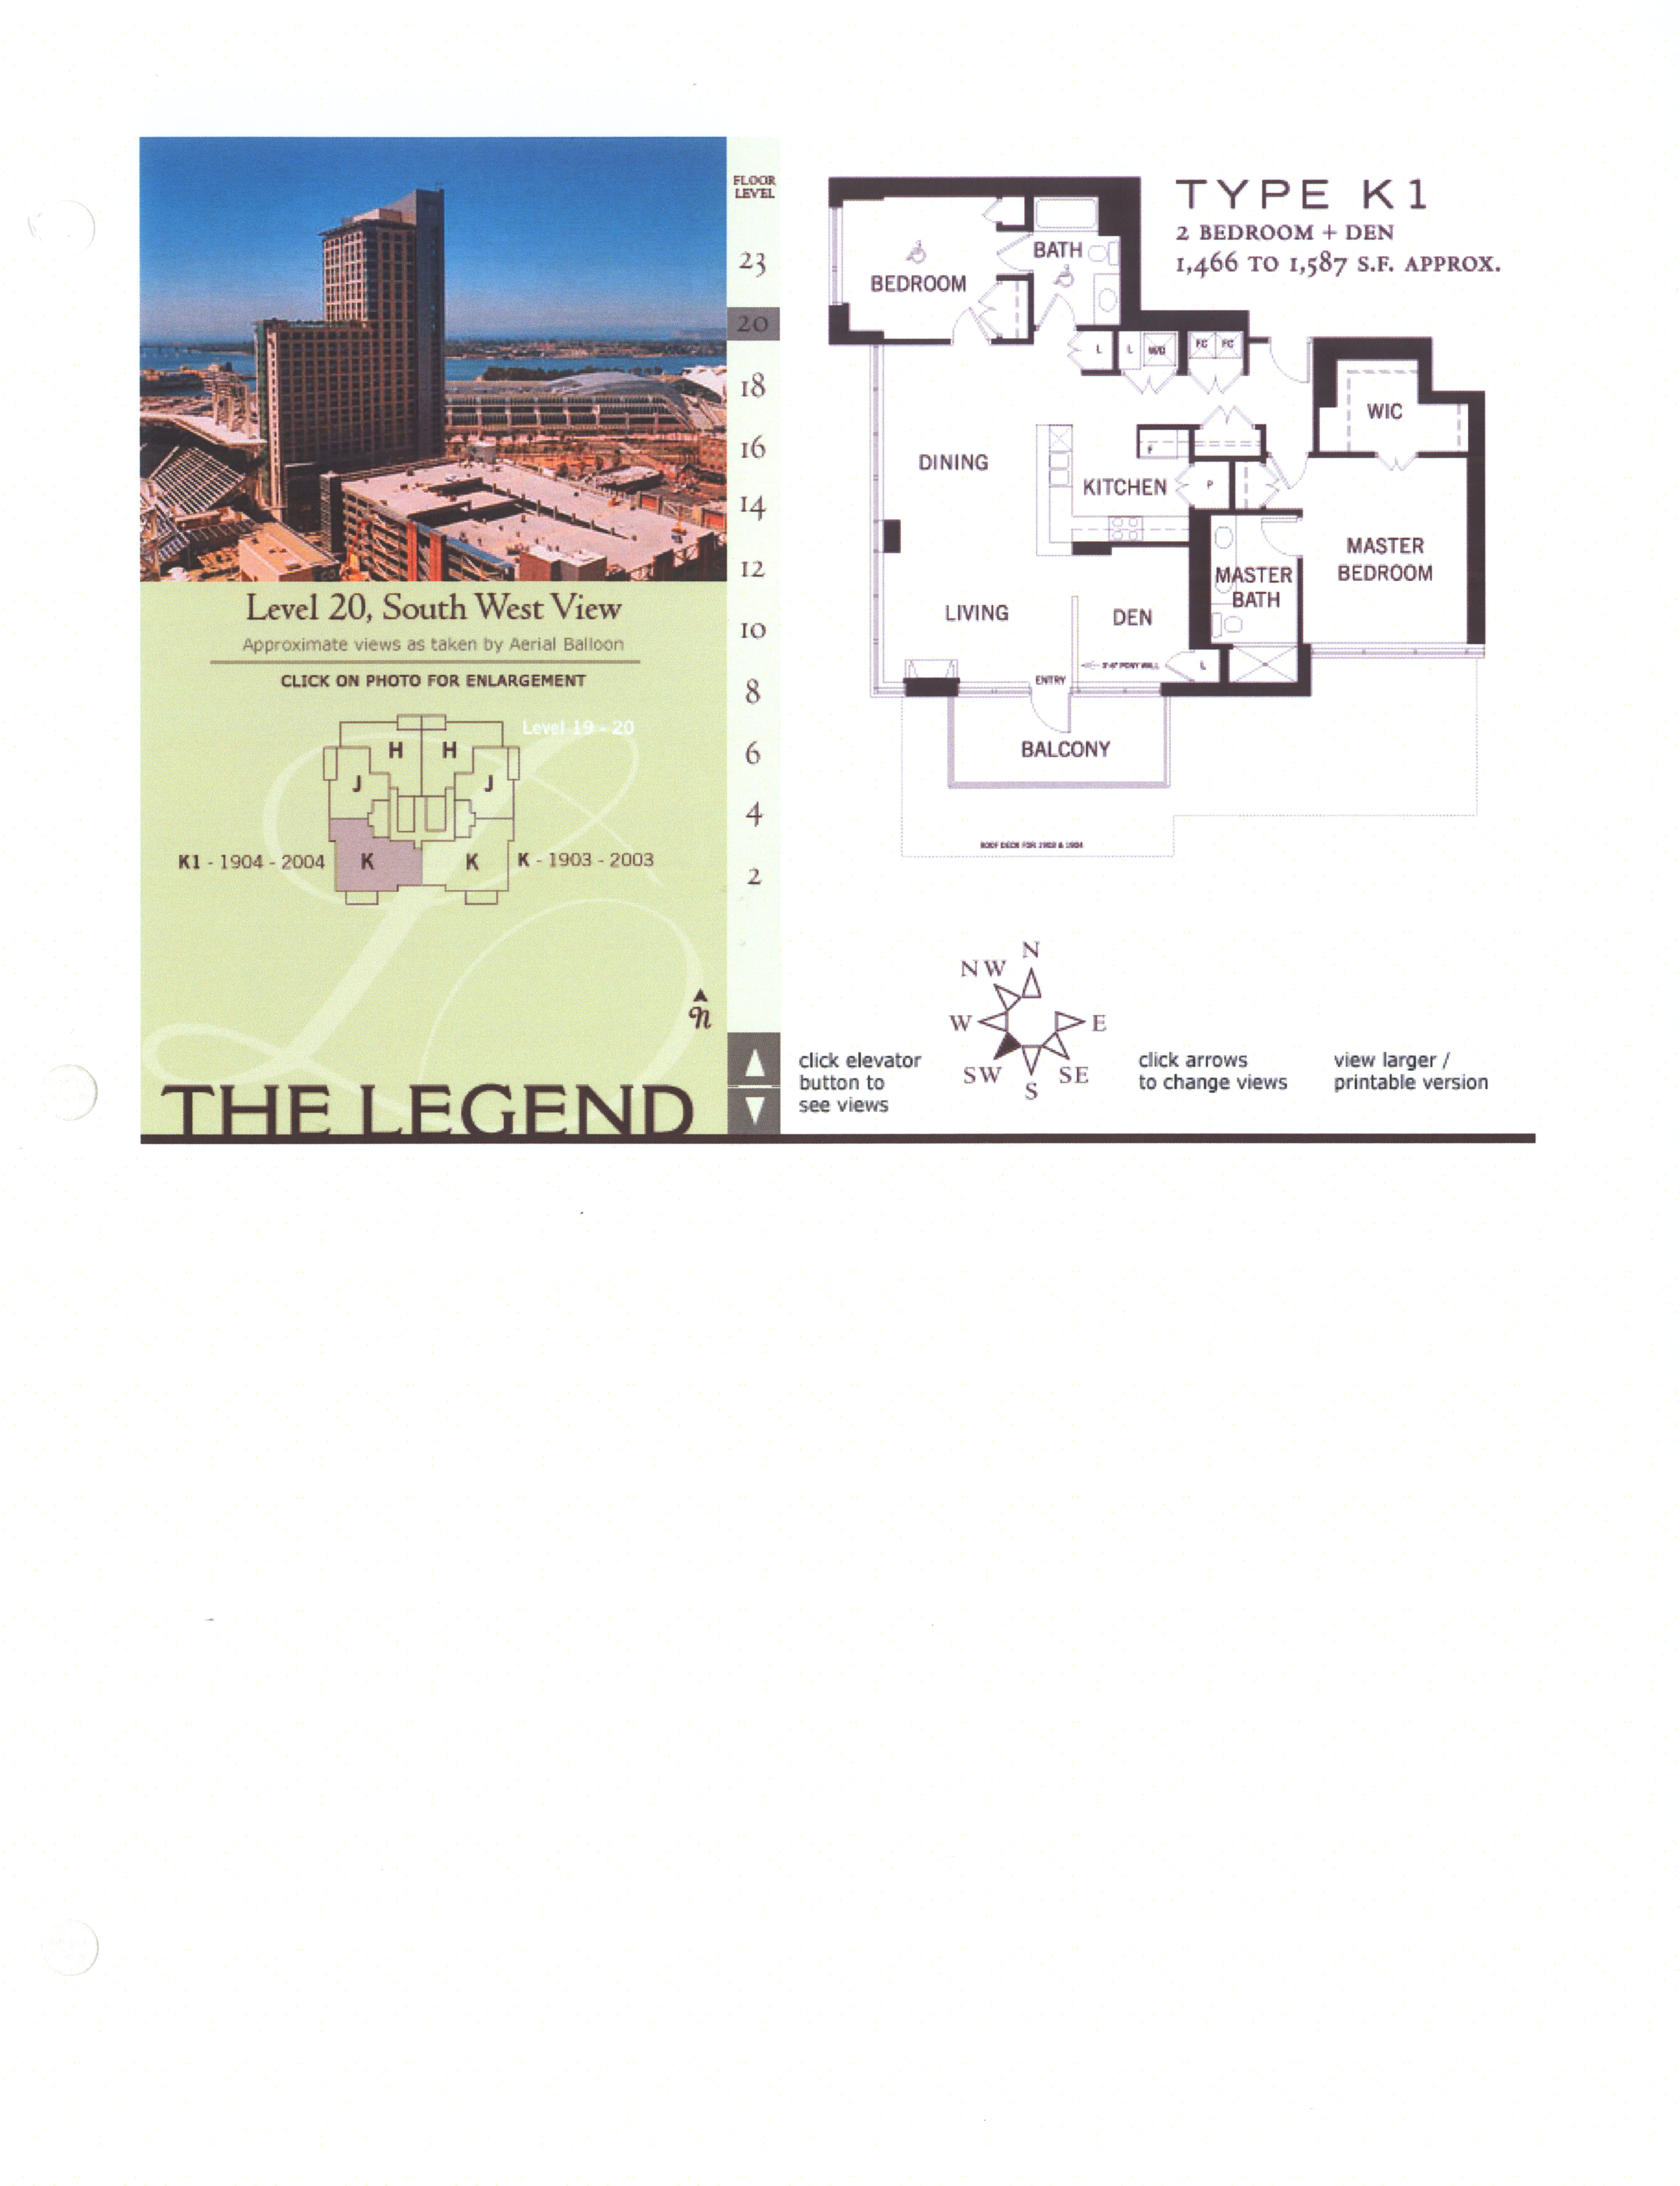 The Legend Floor Plan Level 20. South West View Type K1